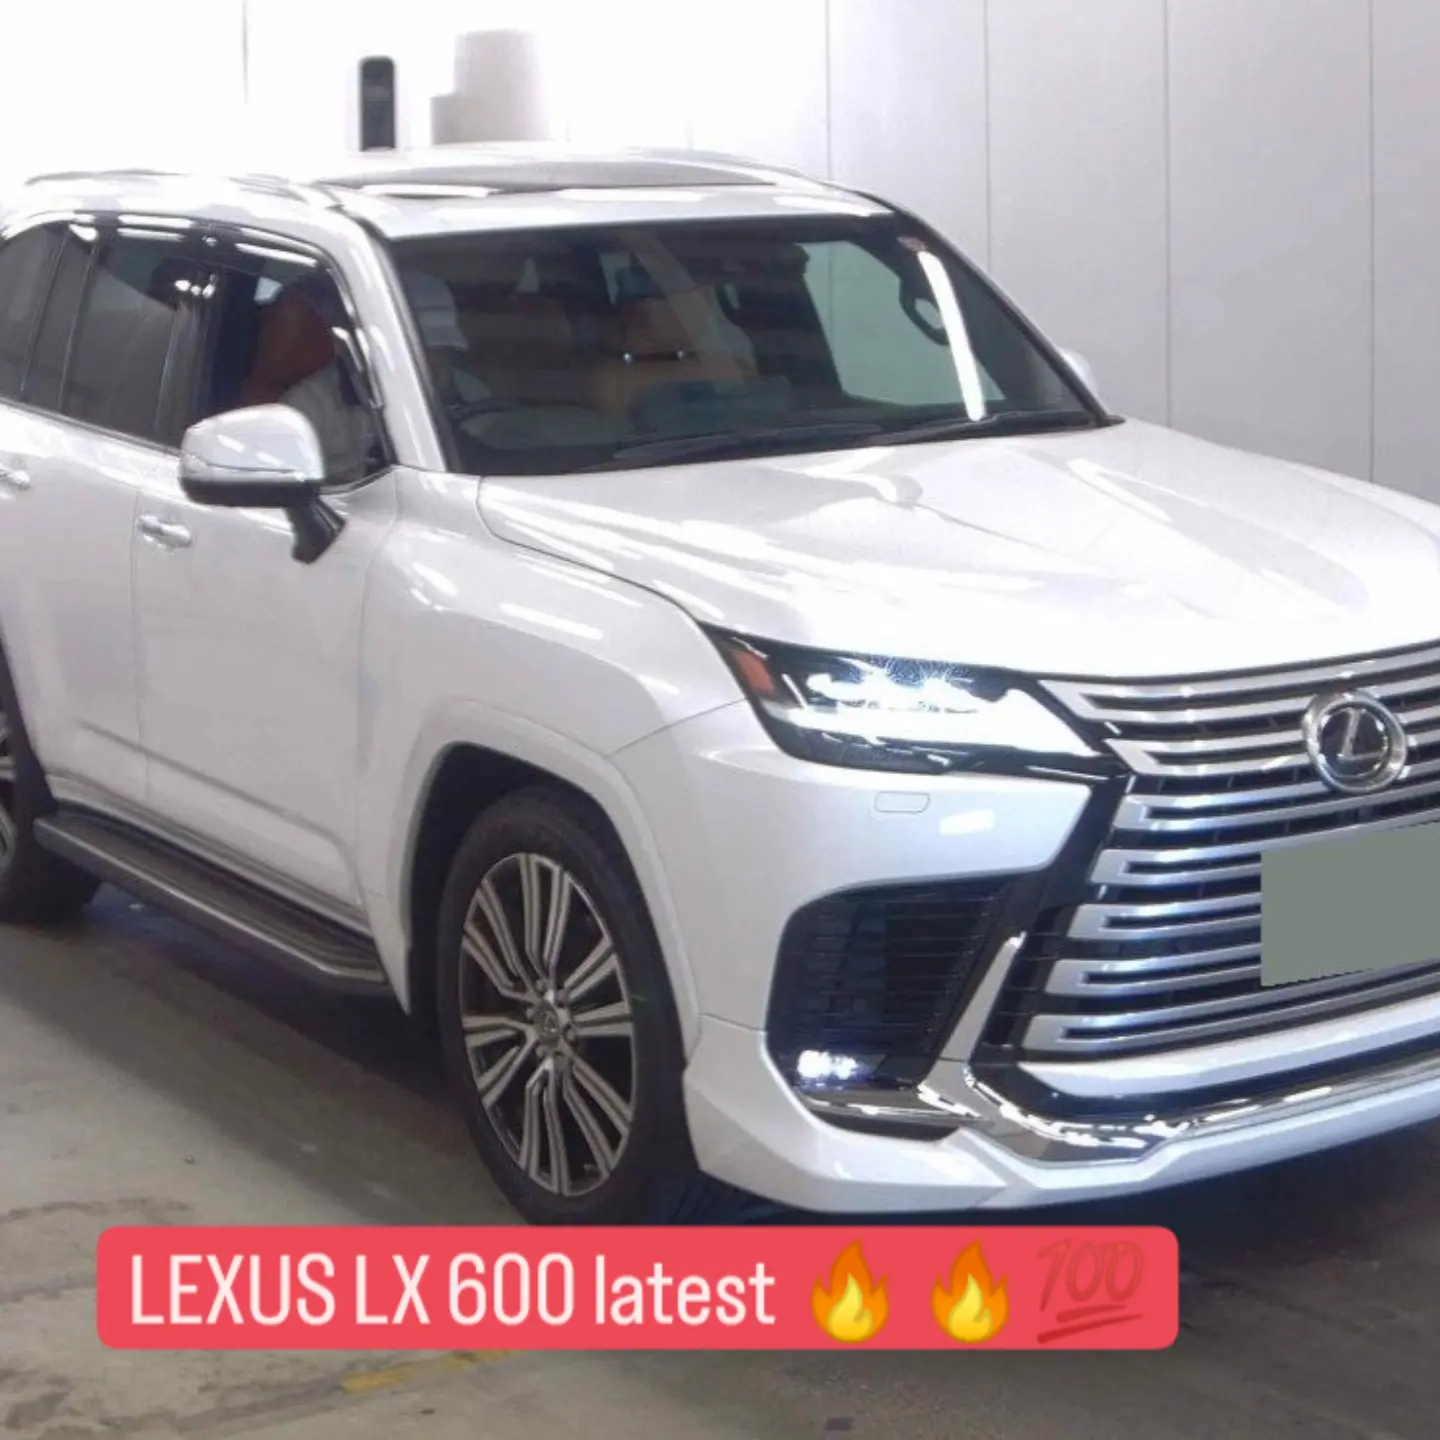 Cars Cars For Sale-LEXUS LX 600 Kenya CHEAPEST 🔥 Lexus lx 600 for sale in kenya HIRE PURCHASE installments OK EXCLUSIVE For SALE in Kenya 9